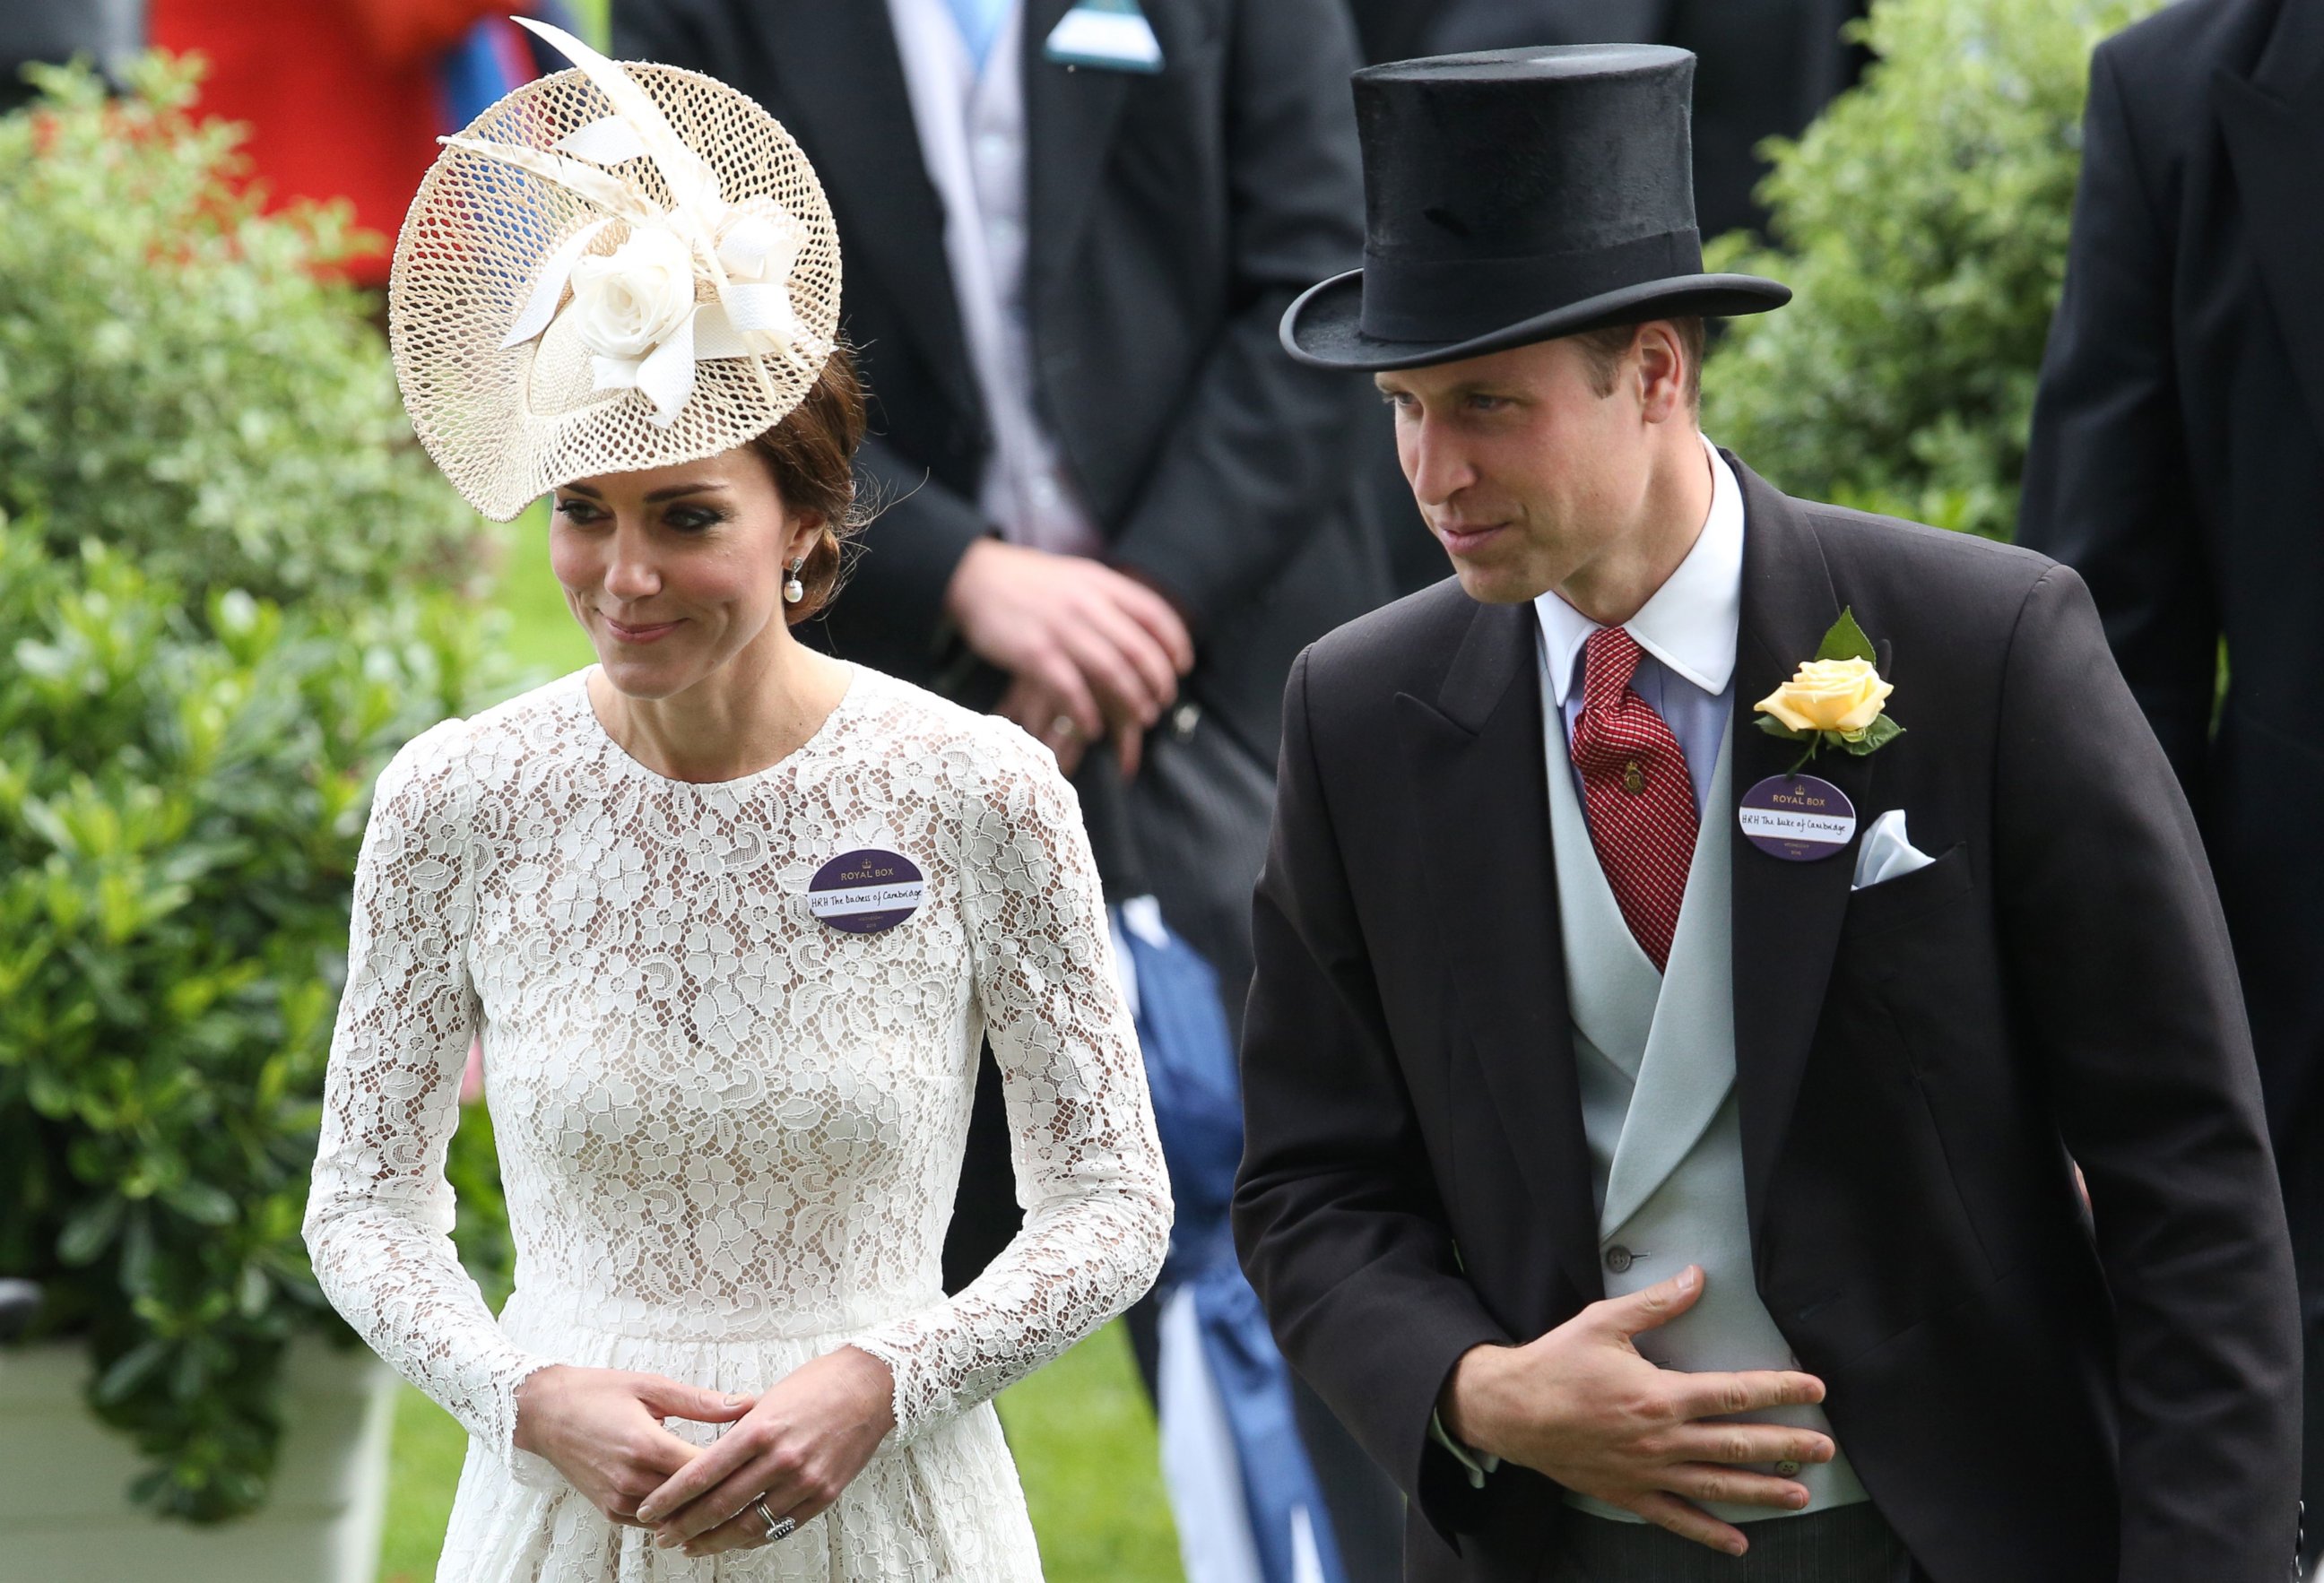 PHOTO: Prince William, Duke of Cambridge, and Catherine, Duchess of Cambridge, attend the second day of the Royal Ascot horse racing meet in Ascot, west of London on June 15, 2016. 